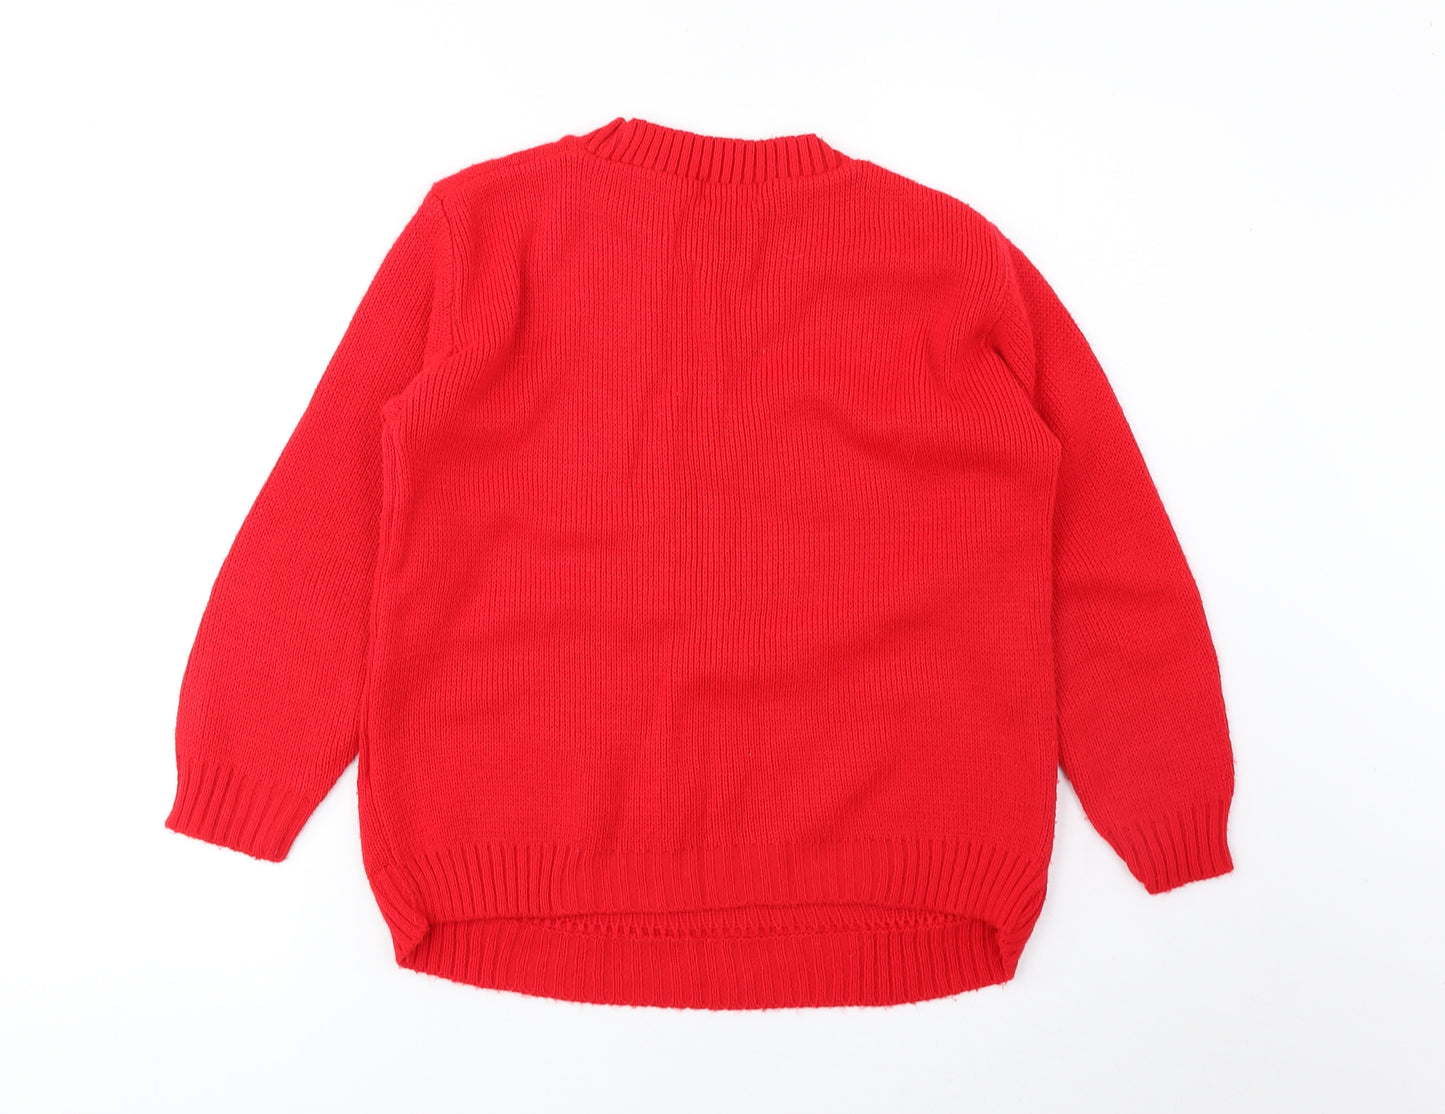 Impulse Boys Red Round Neck Acrylic Blend Pullover Jumper Size 11-12 Years Pullover - Minion Christmas